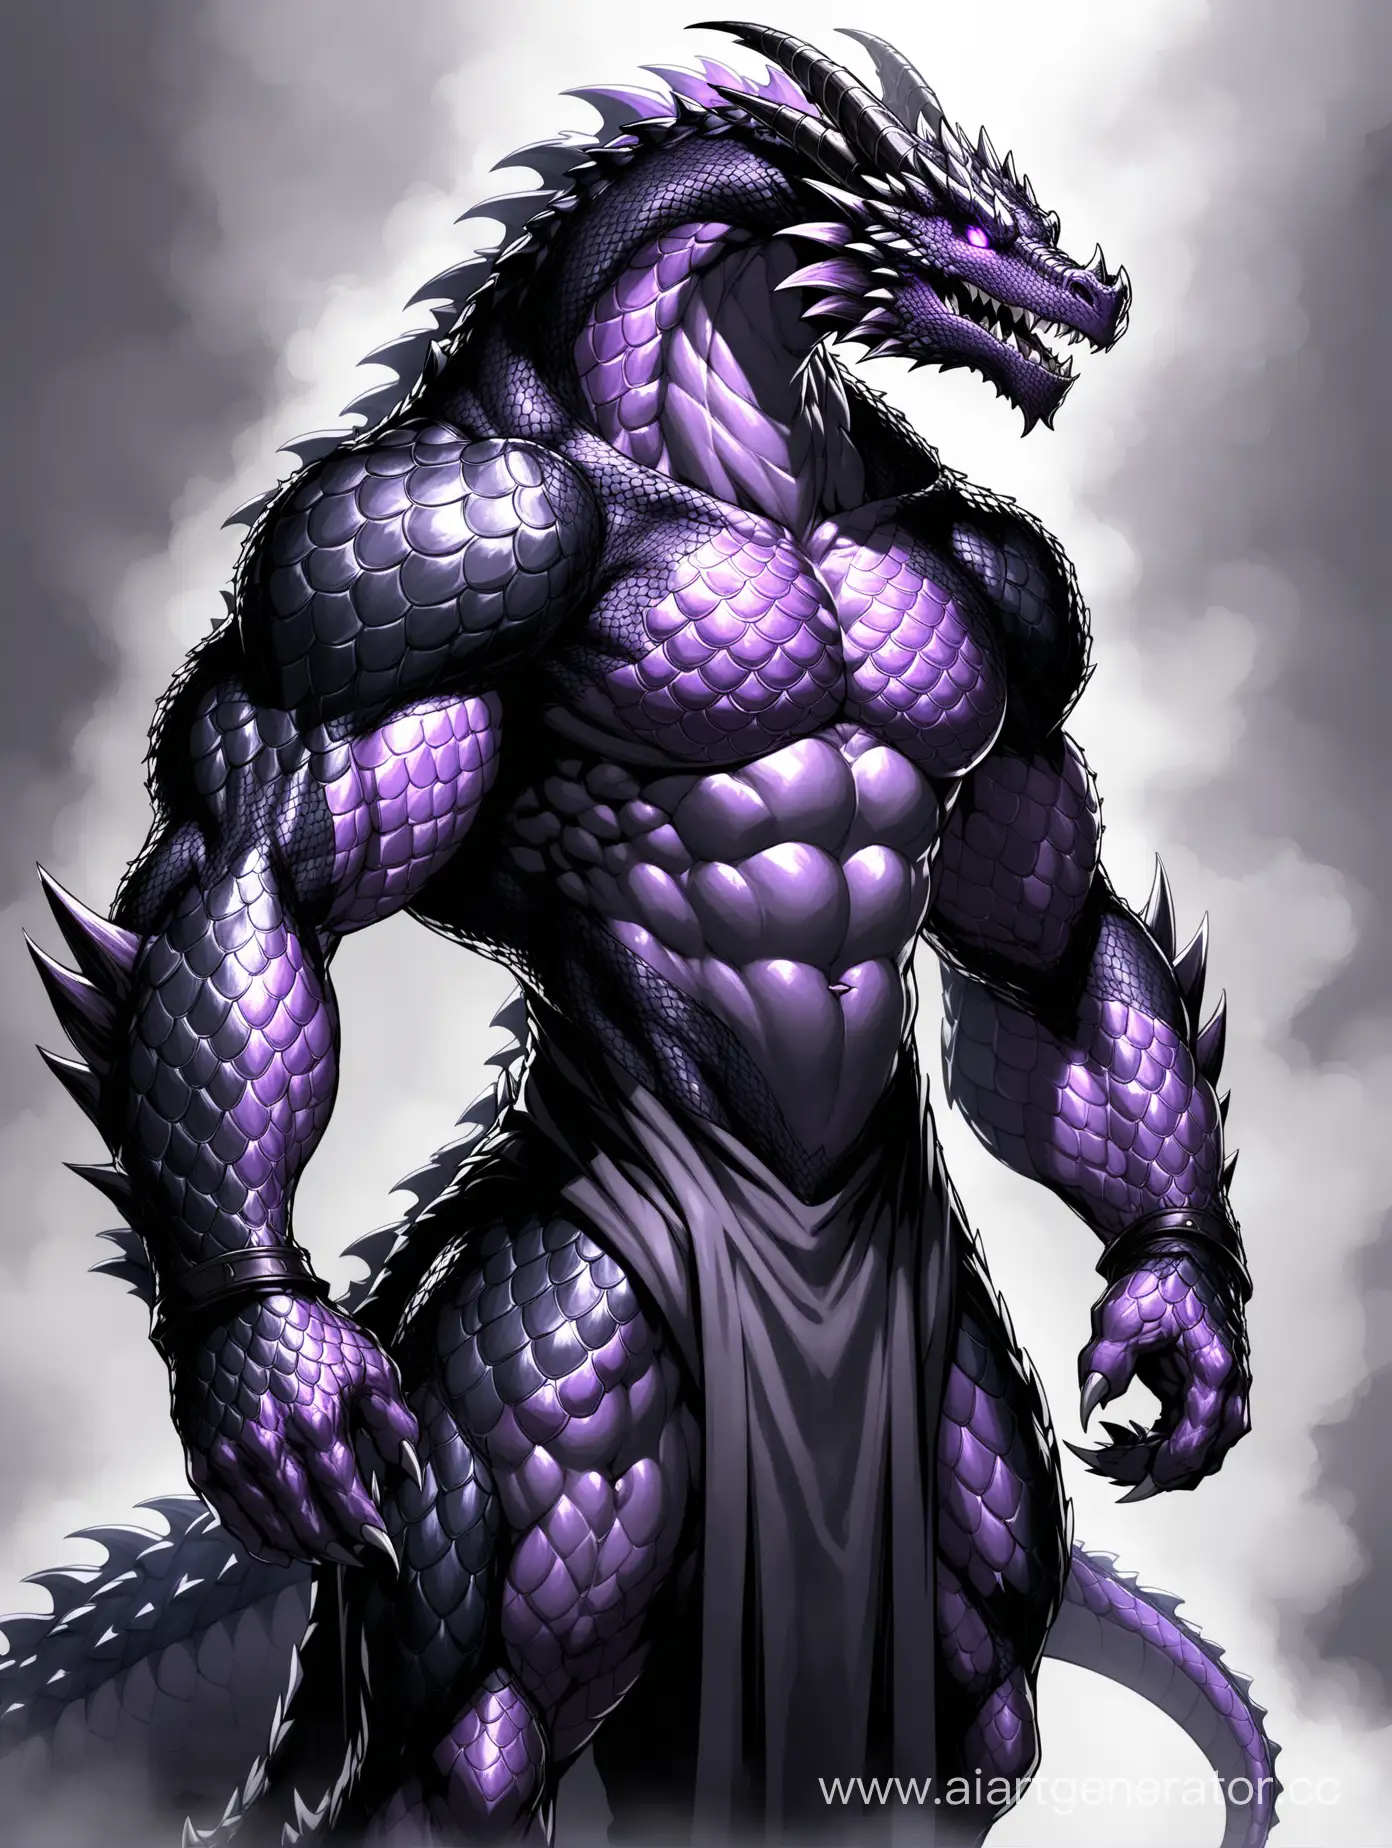 Muscular-Draconic-Warrior-in-Gray-Robe-Powerful-Dragonoid-with-Black-Scales-and-Purple-Eyes